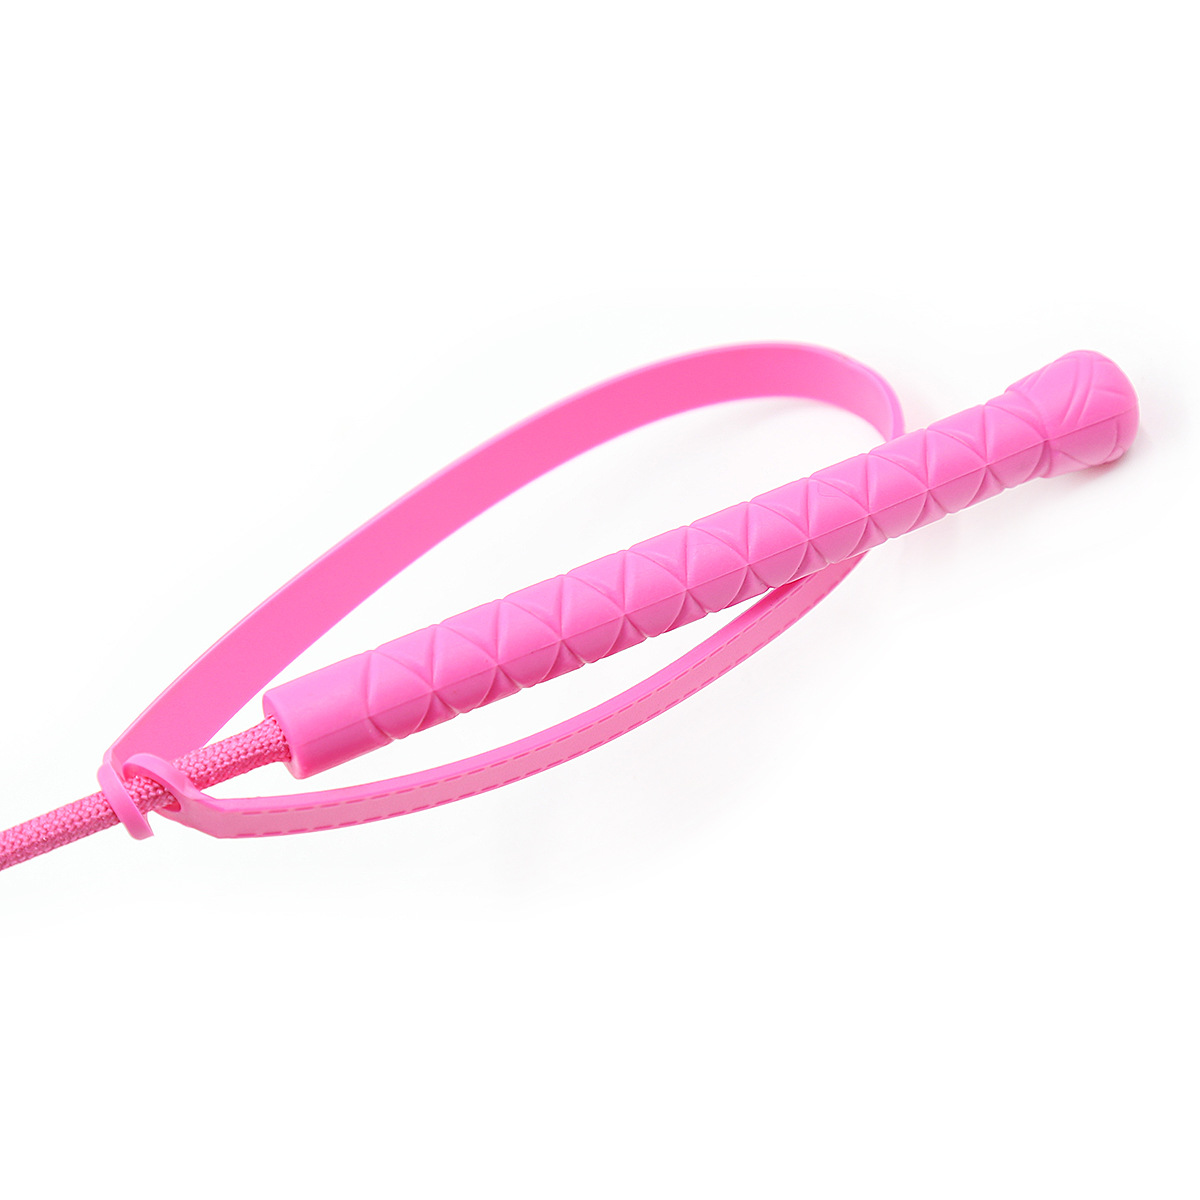 291300166-Adult toy horse whip pink leather whip pointer clap hand slap SP flirting SM tool